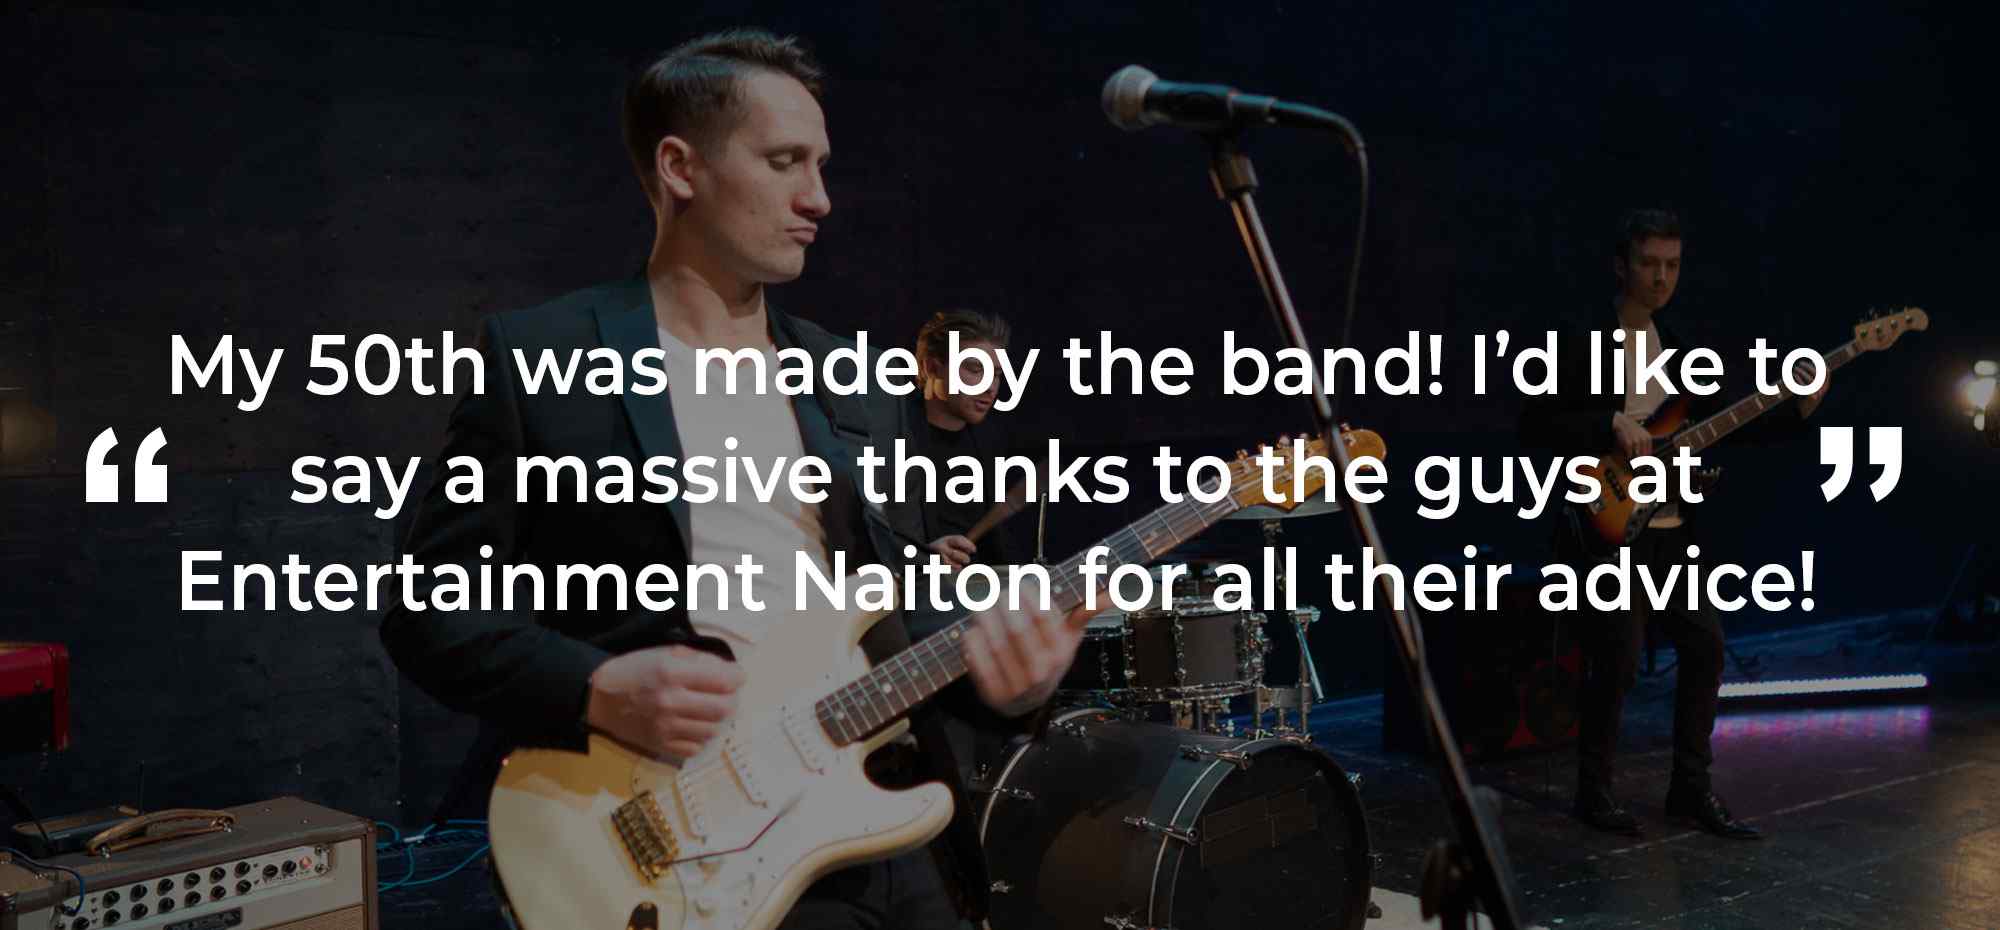 Client Review of a Party Band North Yorkshire